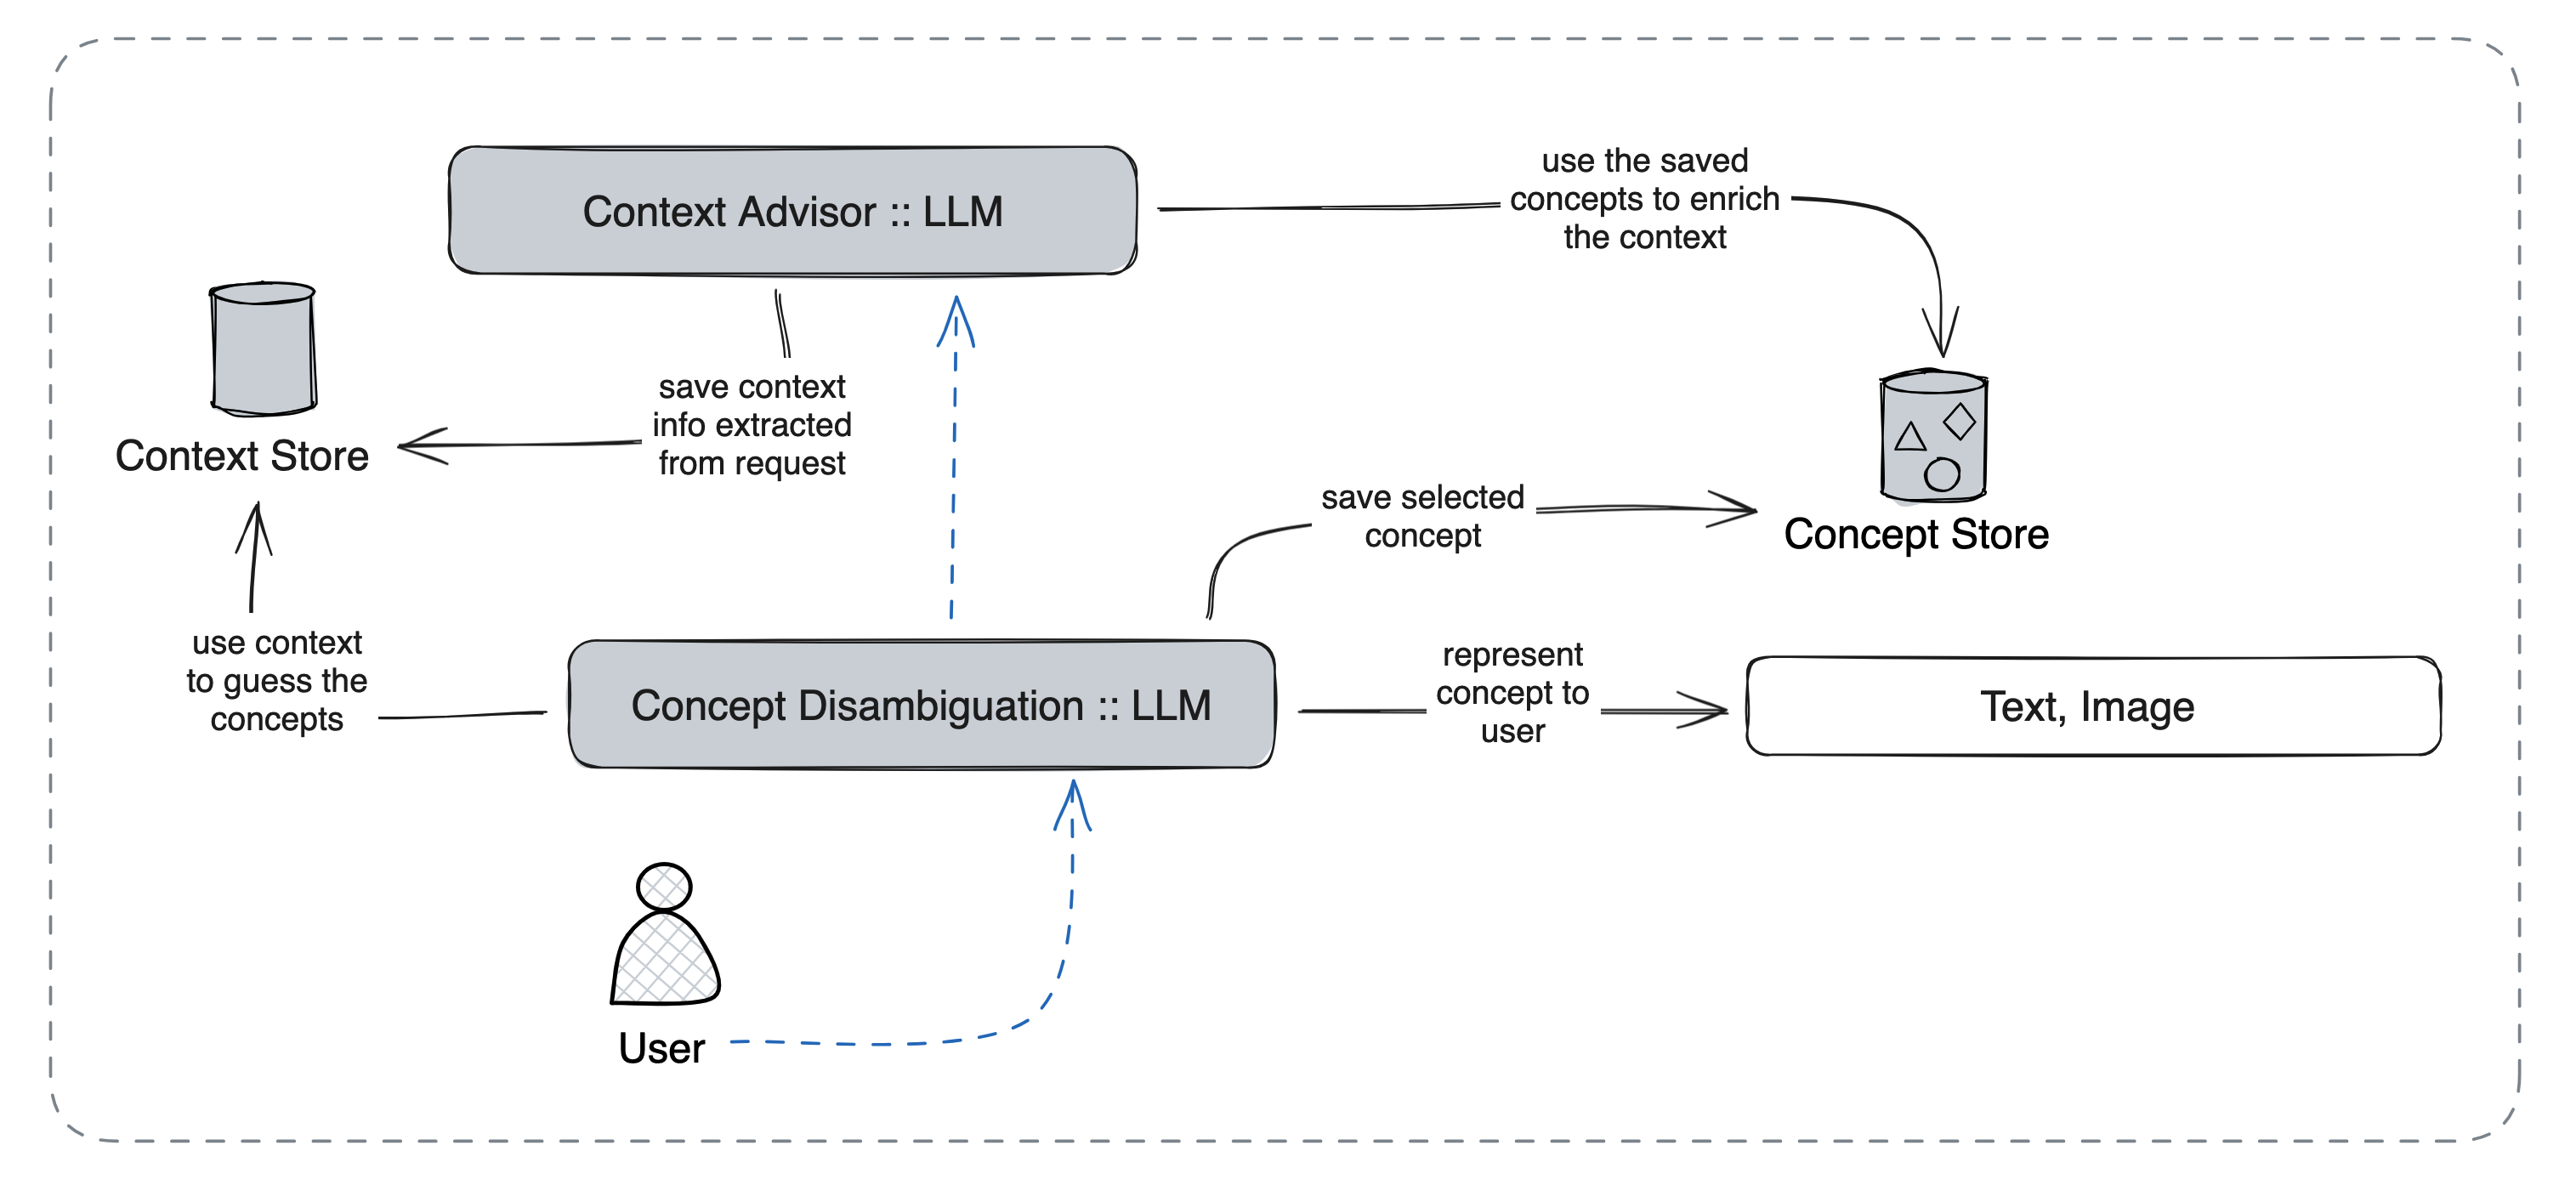 Diagram showing the smart home interaction system. Components include User, Concept Disambiguation, Context Advisor, Context and Concept Stores, with LLMs processing requests and generating text/image responses.